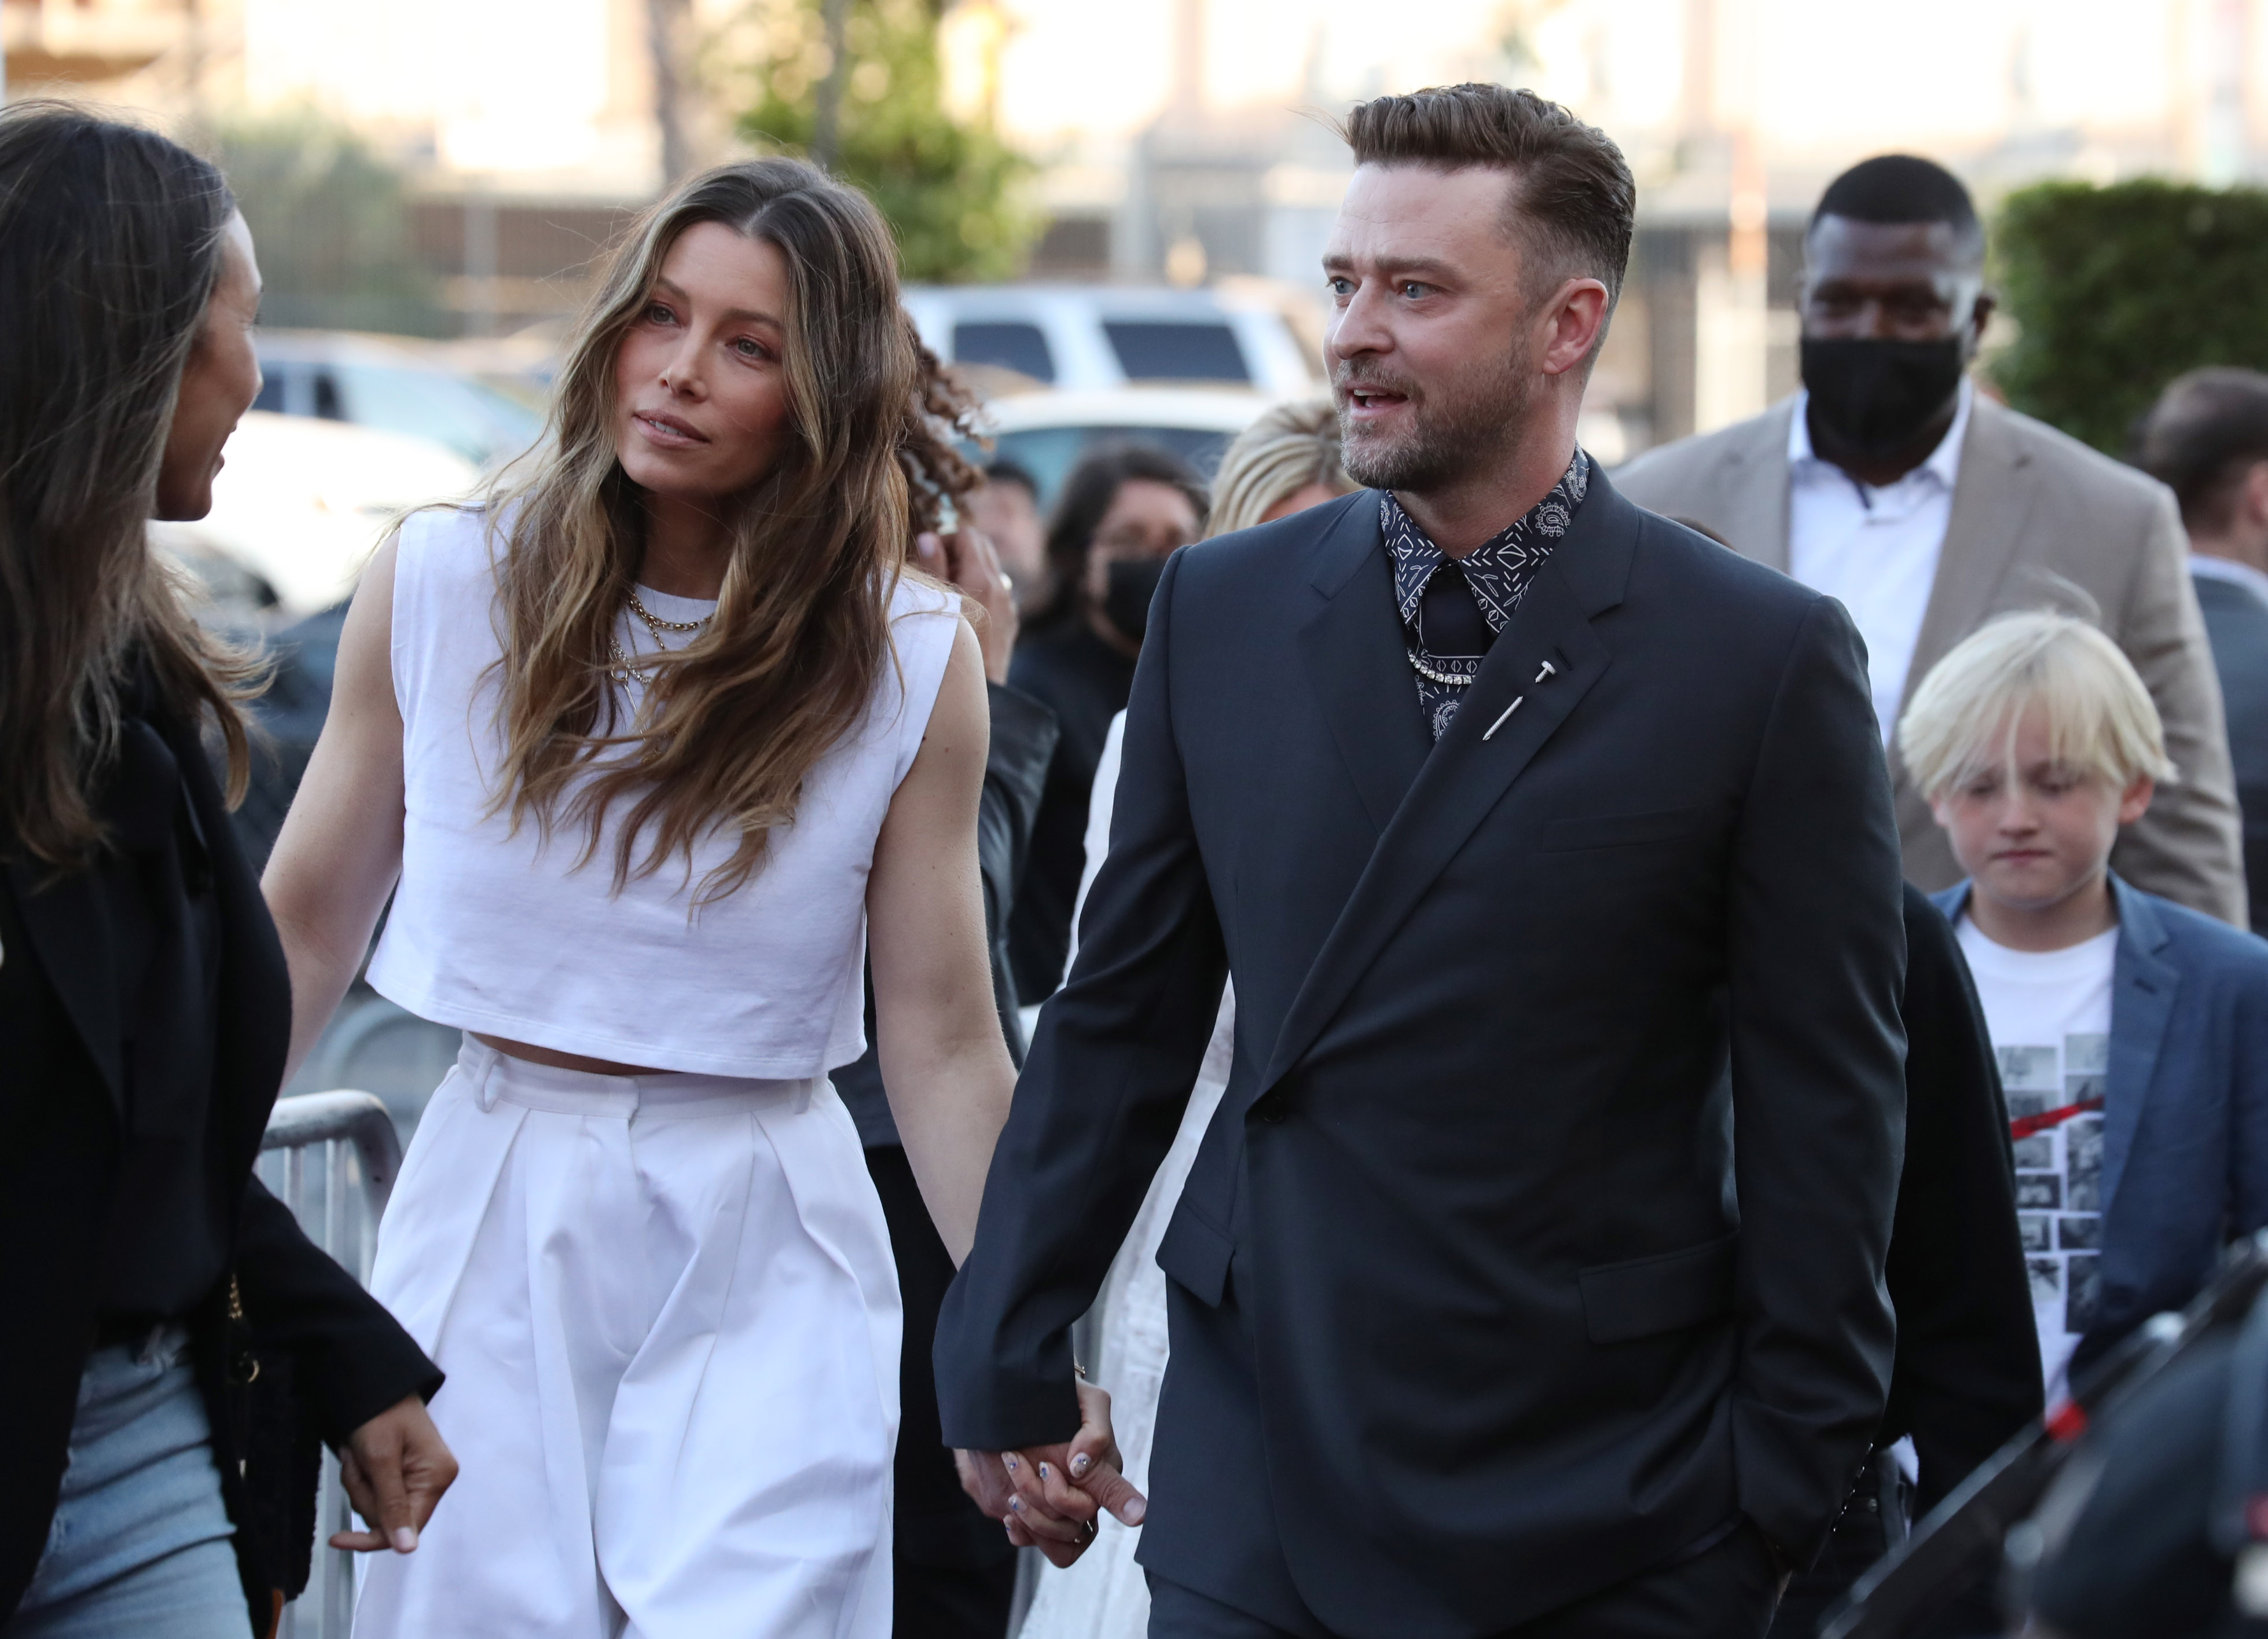 Jessica Biel and Justin Timberlake's Candy Premiere Photos